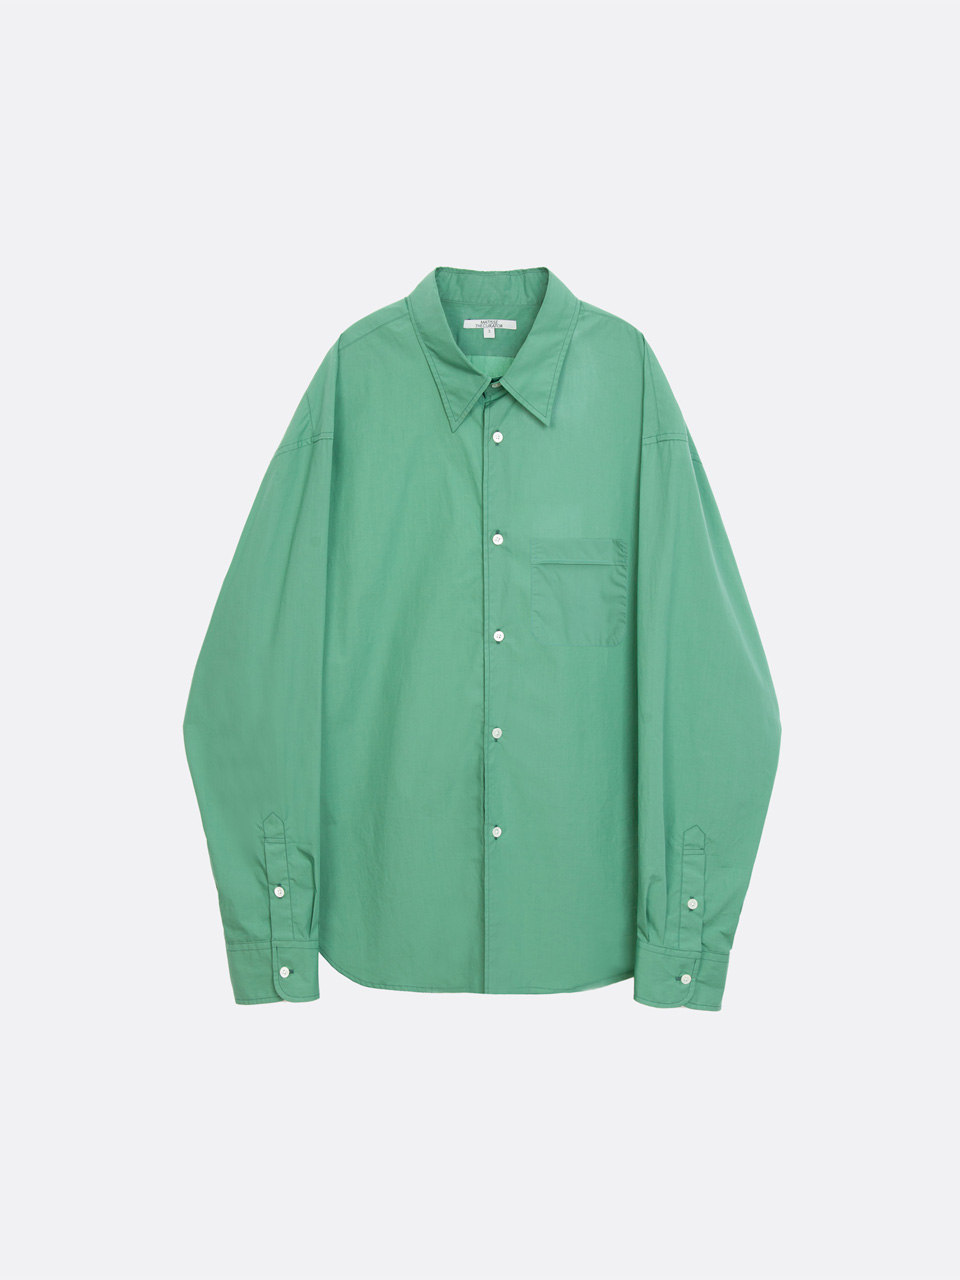 MATISSE THE CURATOR - LONG POINT SHIRTS (EMERALD)